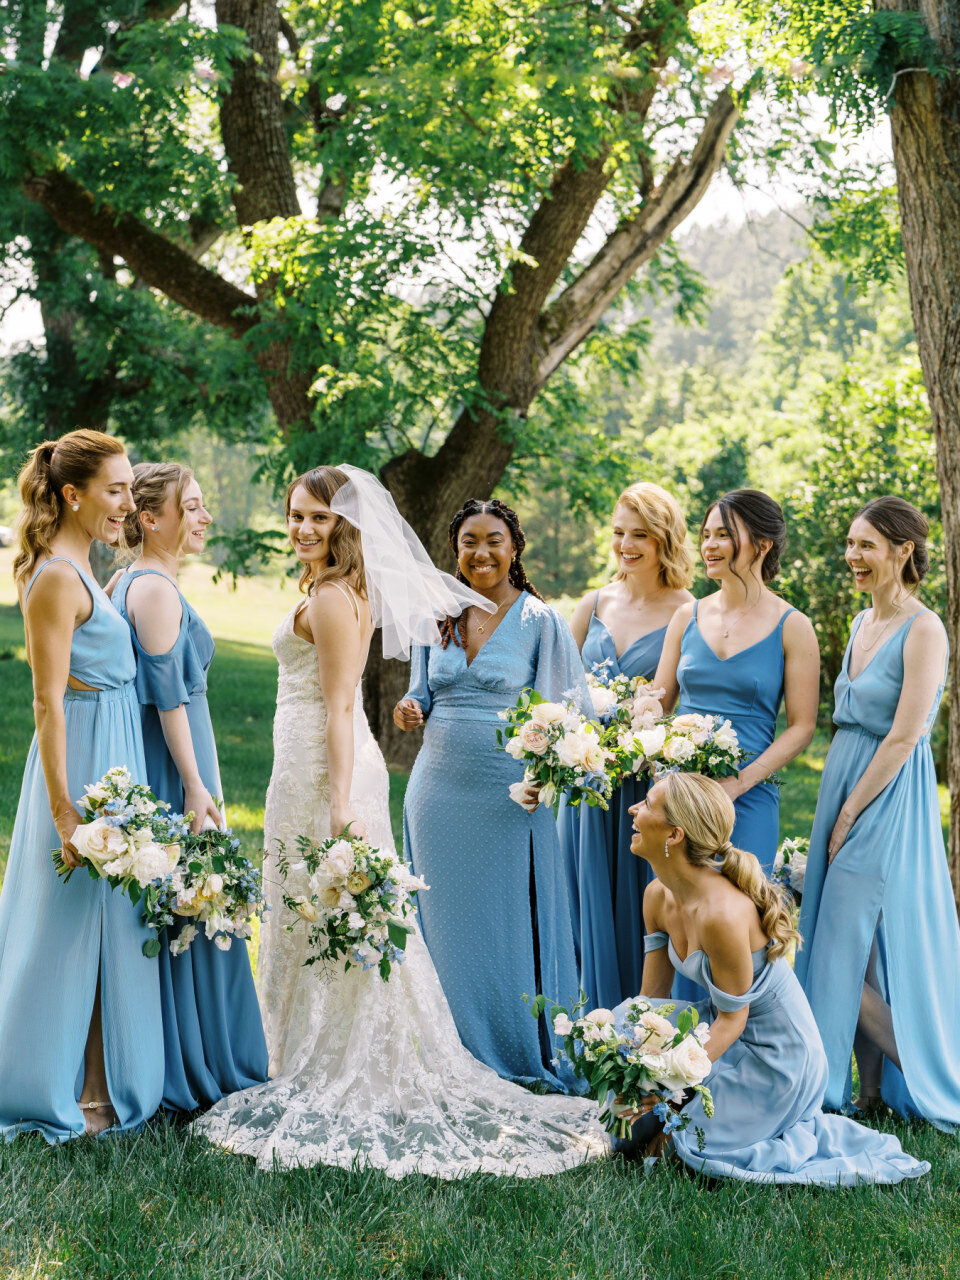 Seven bridesmaids wearing blue dresses surrounding a bride wearing a white dress and veil